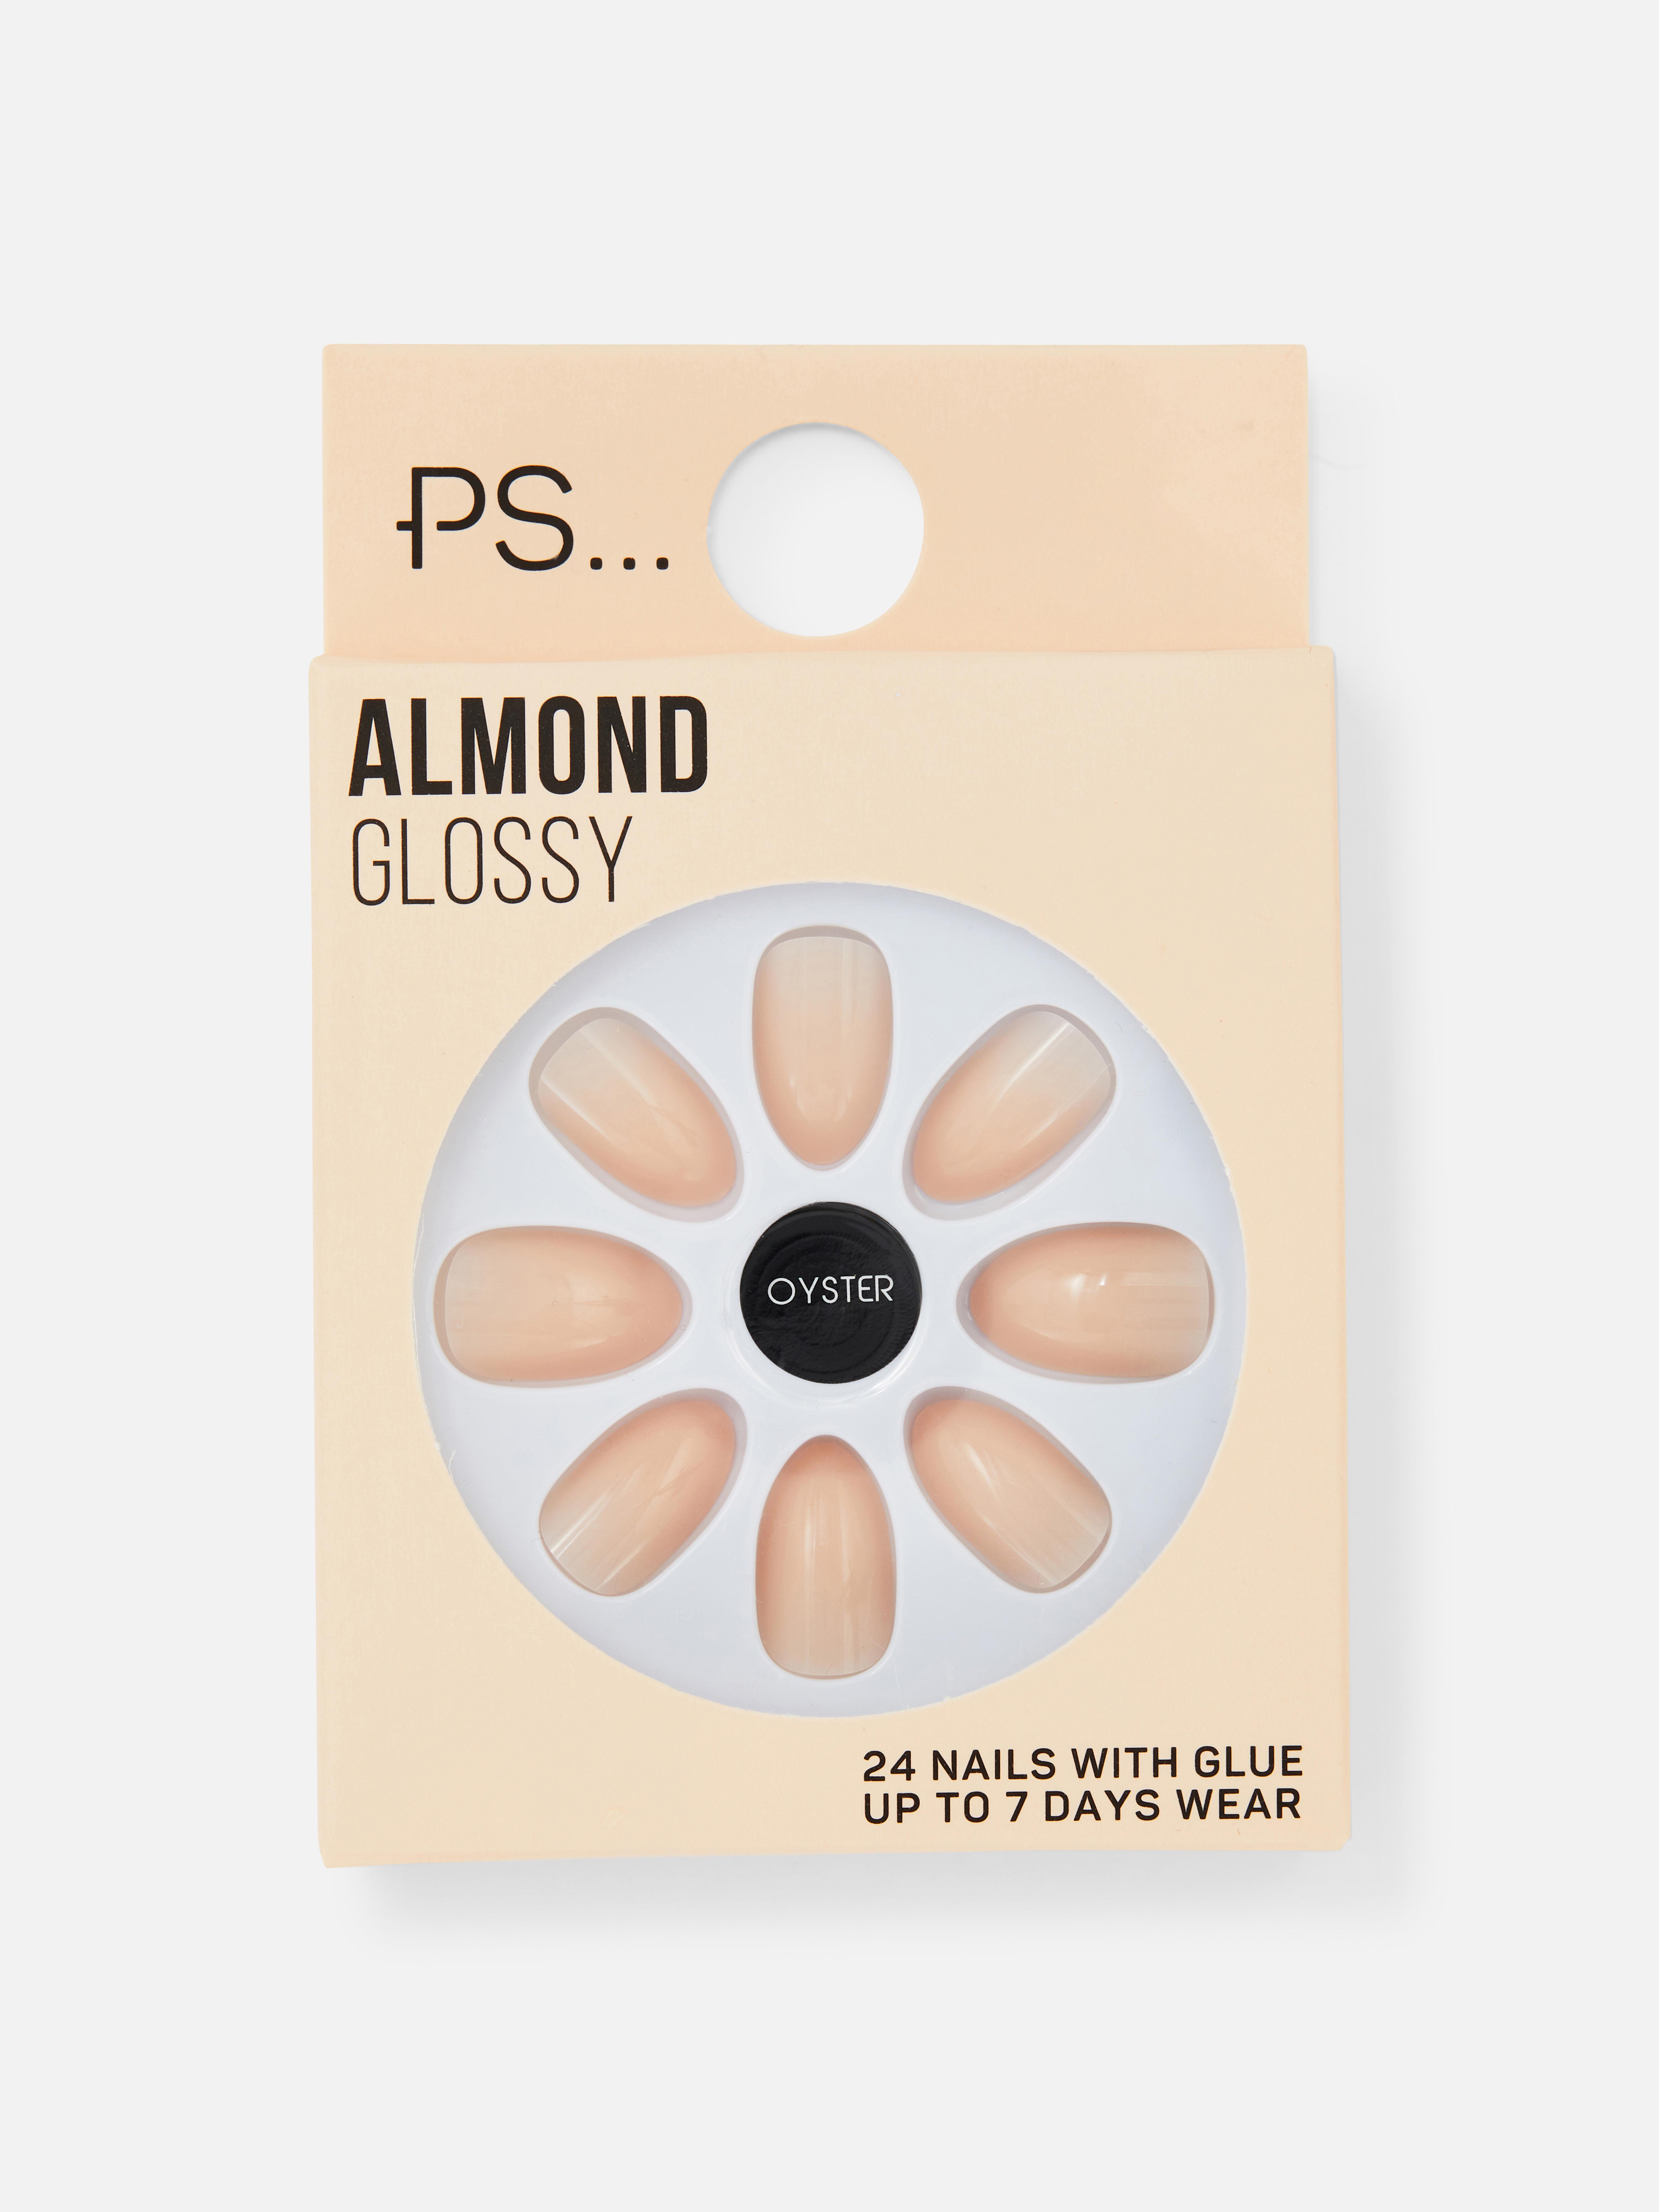 PS… Almond Glossy Jewel Faux Nails